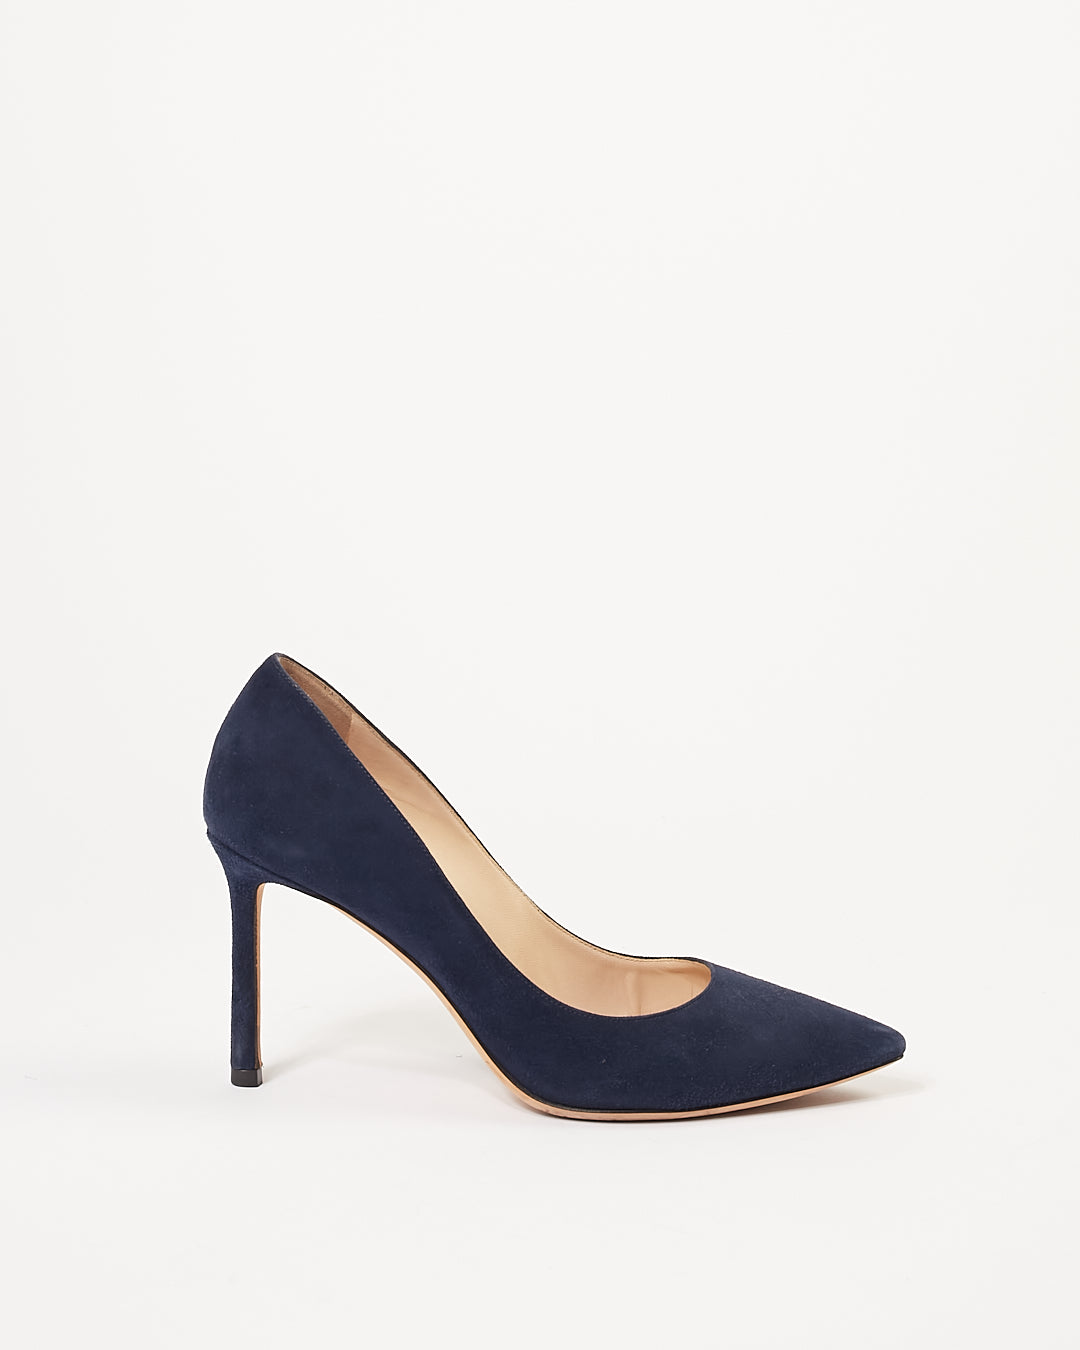 Jimmy Choo Navy Suede Point Toe Pumps - 36